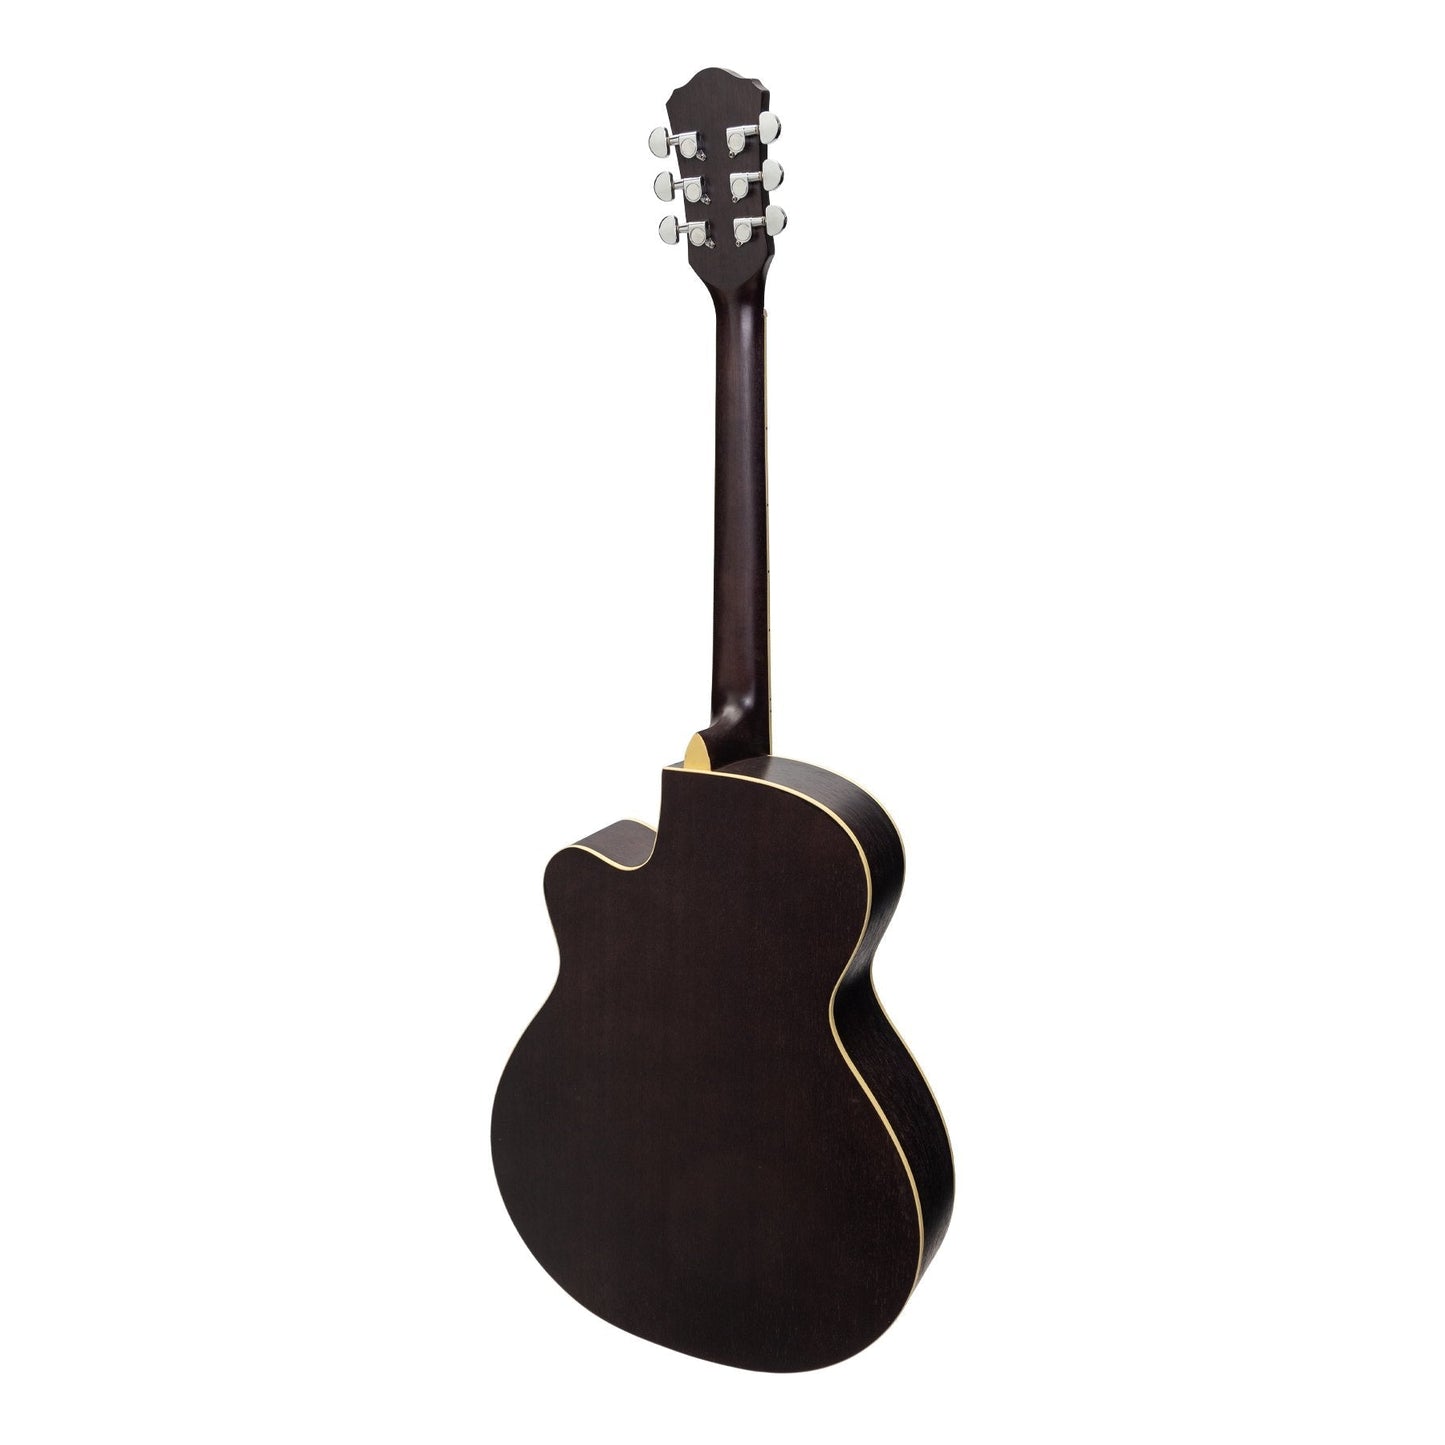 Load image into Gallery viewer, Martinez Jazz Hybrid Acoustic Small Body Cutaway Guitar (Black)
